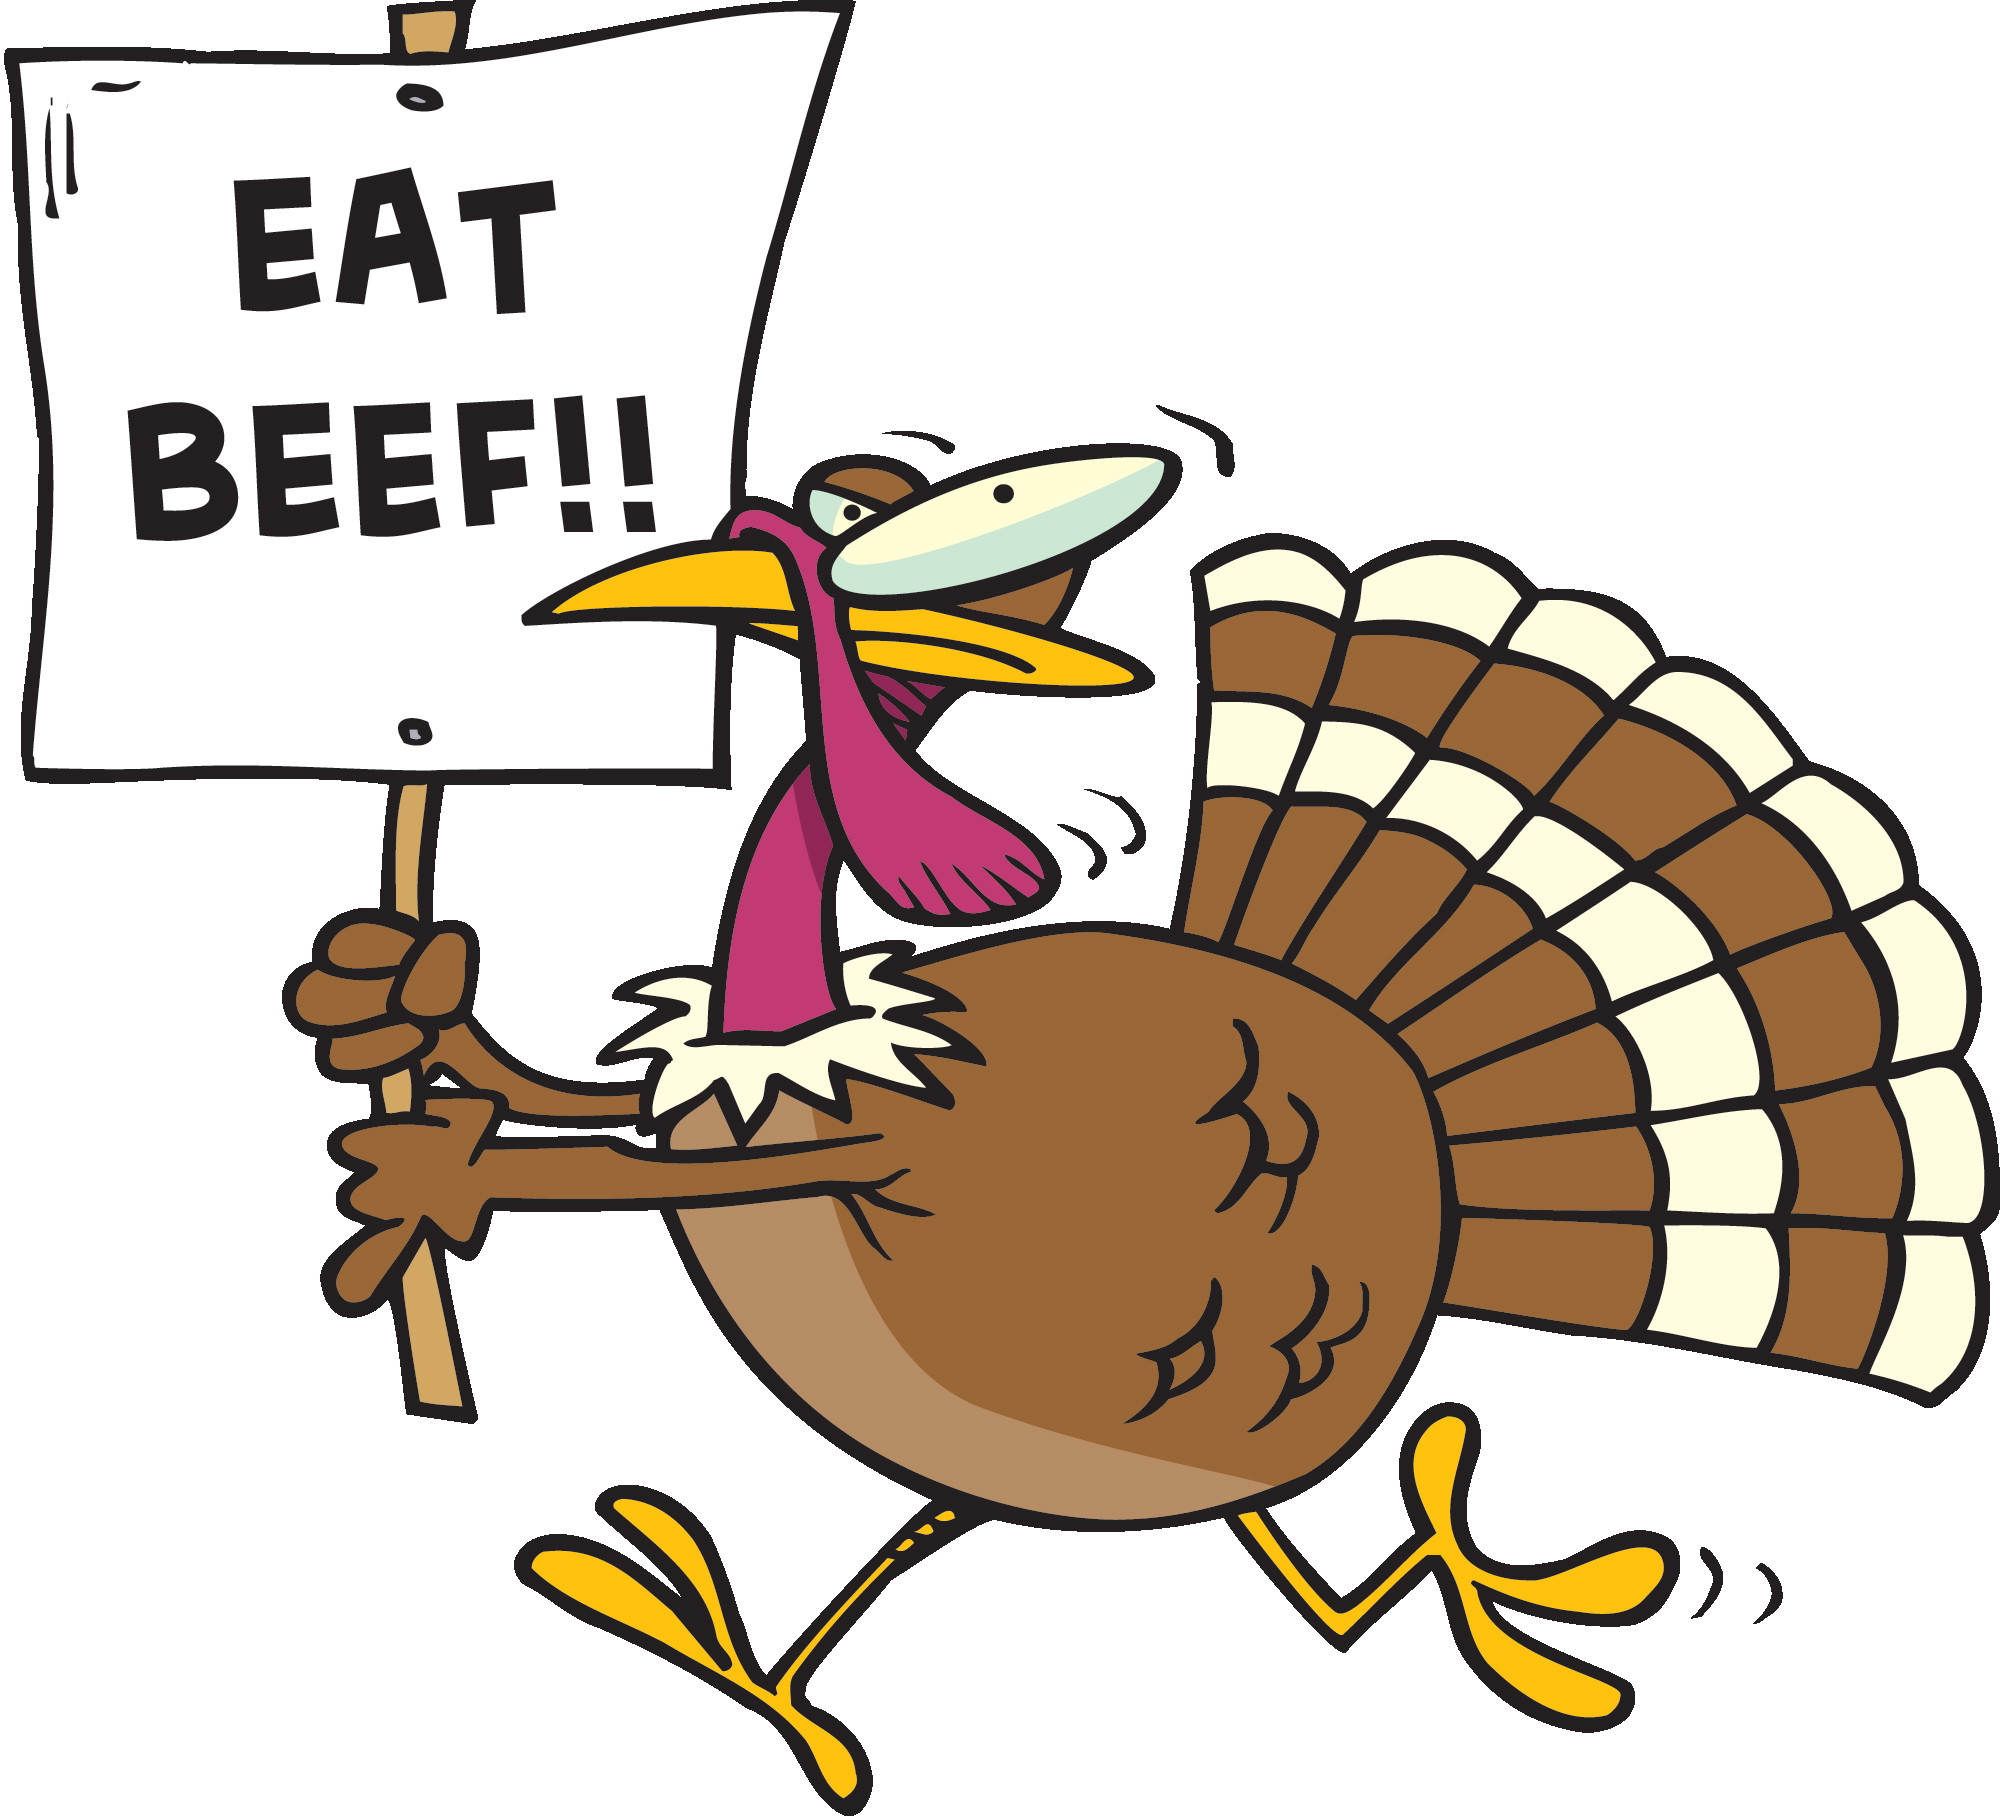 Free Turkey Clipart Thanksgiving
 Eat Beef Funny Turkey Clipart Image